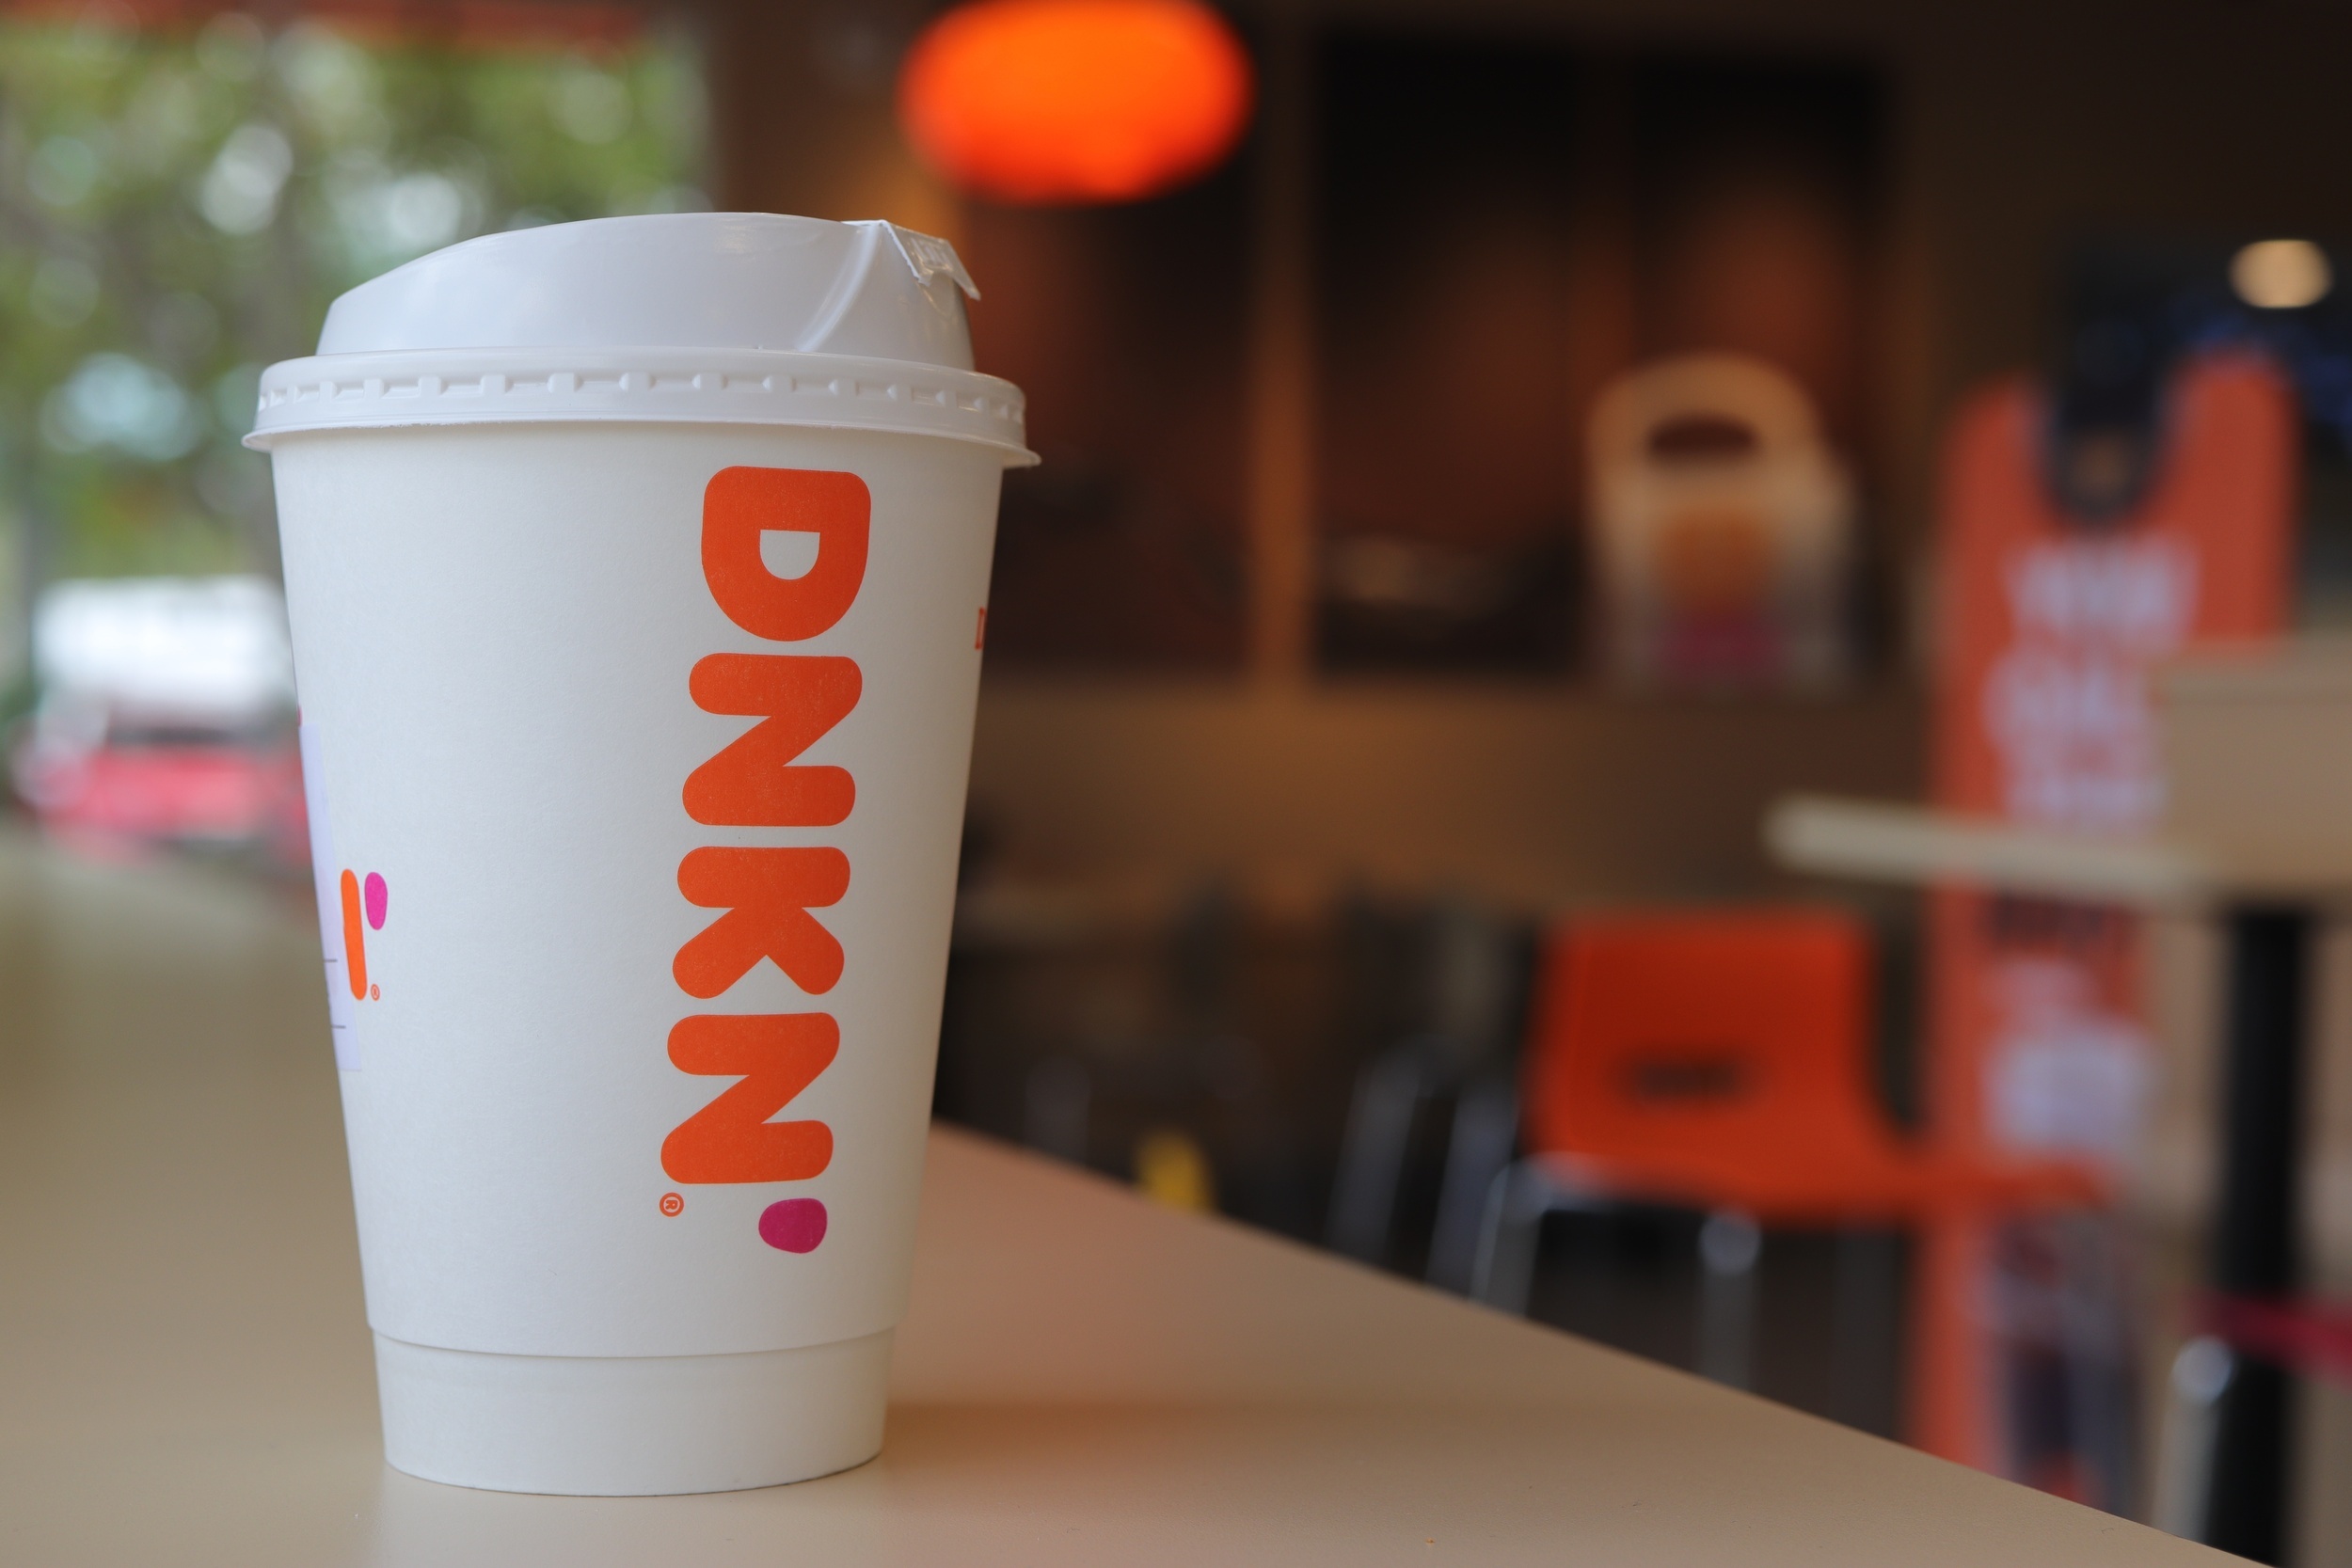 <p>In 2018, Dunkin’ also pledged to replace all of their styrofoam — a.k.a. polystyrene — cups with recyclable paper ones over the next two years. In May 2020, the company announced they had achieved their sustainability goal. This new rule didn’t just apply to Dunkin’ locations in the U.S., but every store worldwide!</p><p>You may also like: <a href='https://www.yardbarker.com/lifestyle/articles/20_reliable_home_remedies_that_will_actually_work_for_you_031924/s1__36051191'>20 reliable home remedies that will actually work for you</a></p>